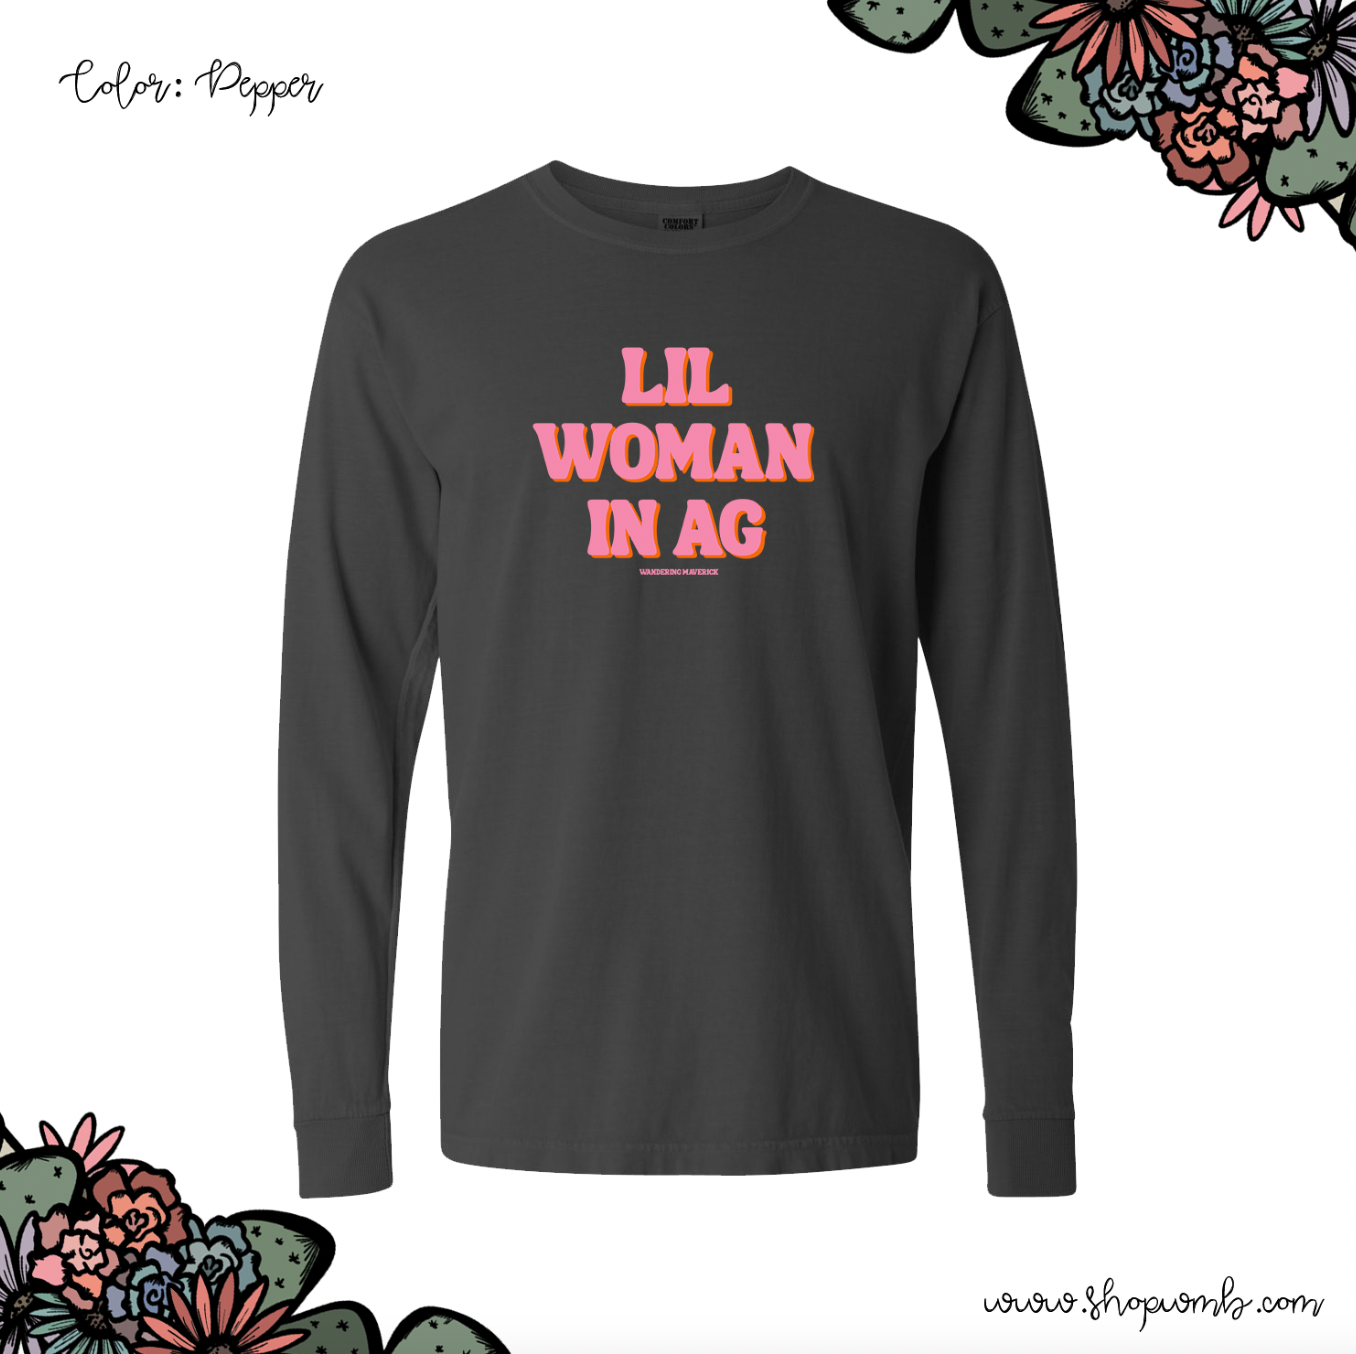 Lil Women In AG LONG SLEEVE T-Shirt (S-3XL) - Multiple Colors!